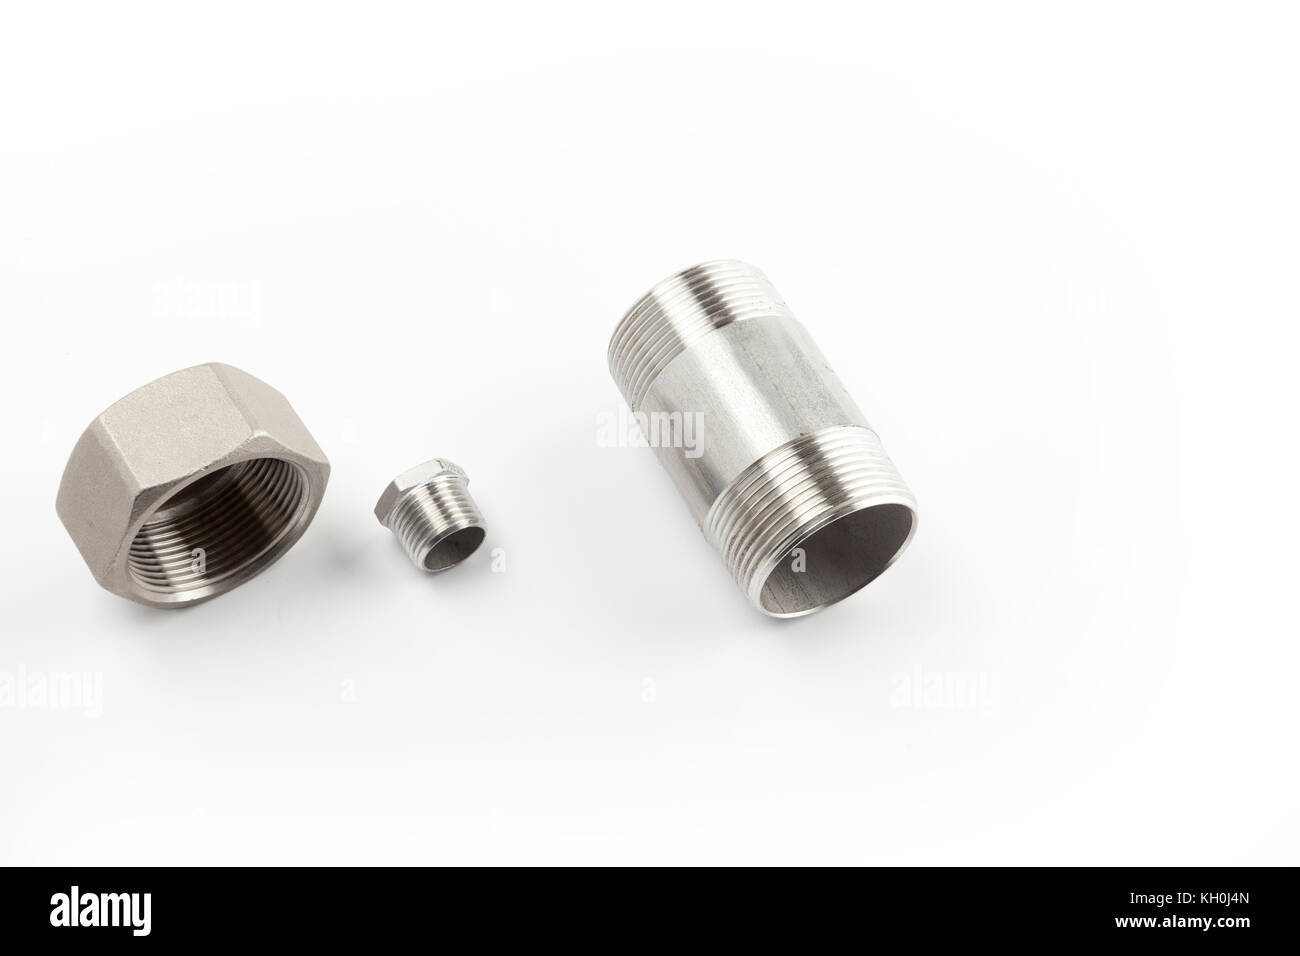 metal water valve fittings on a white background Stock Photo